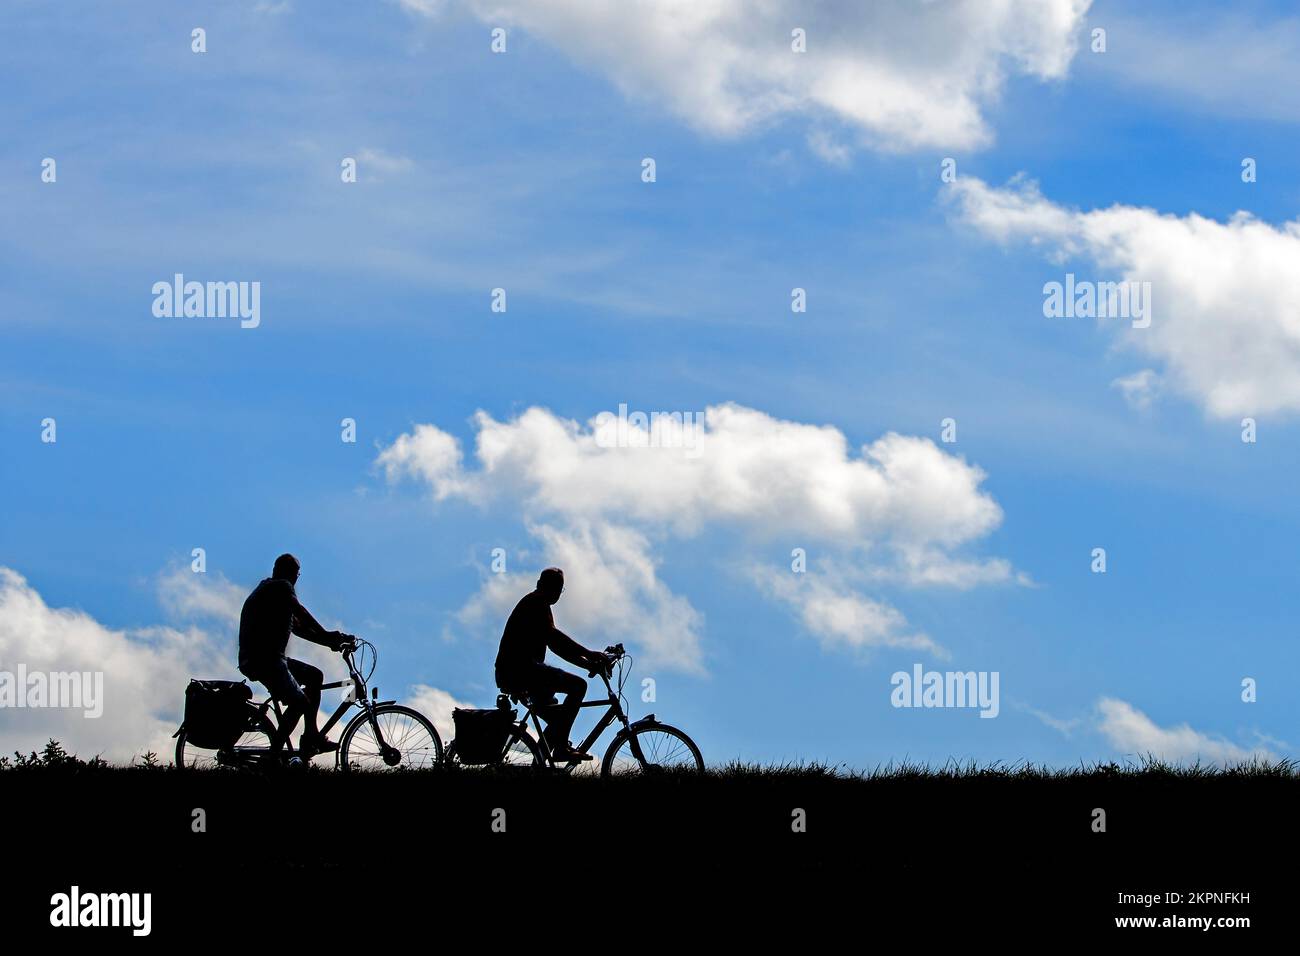 Two elderly cyclists silhouetted riding their bicycles against cloudy sky in summer Stock Photo